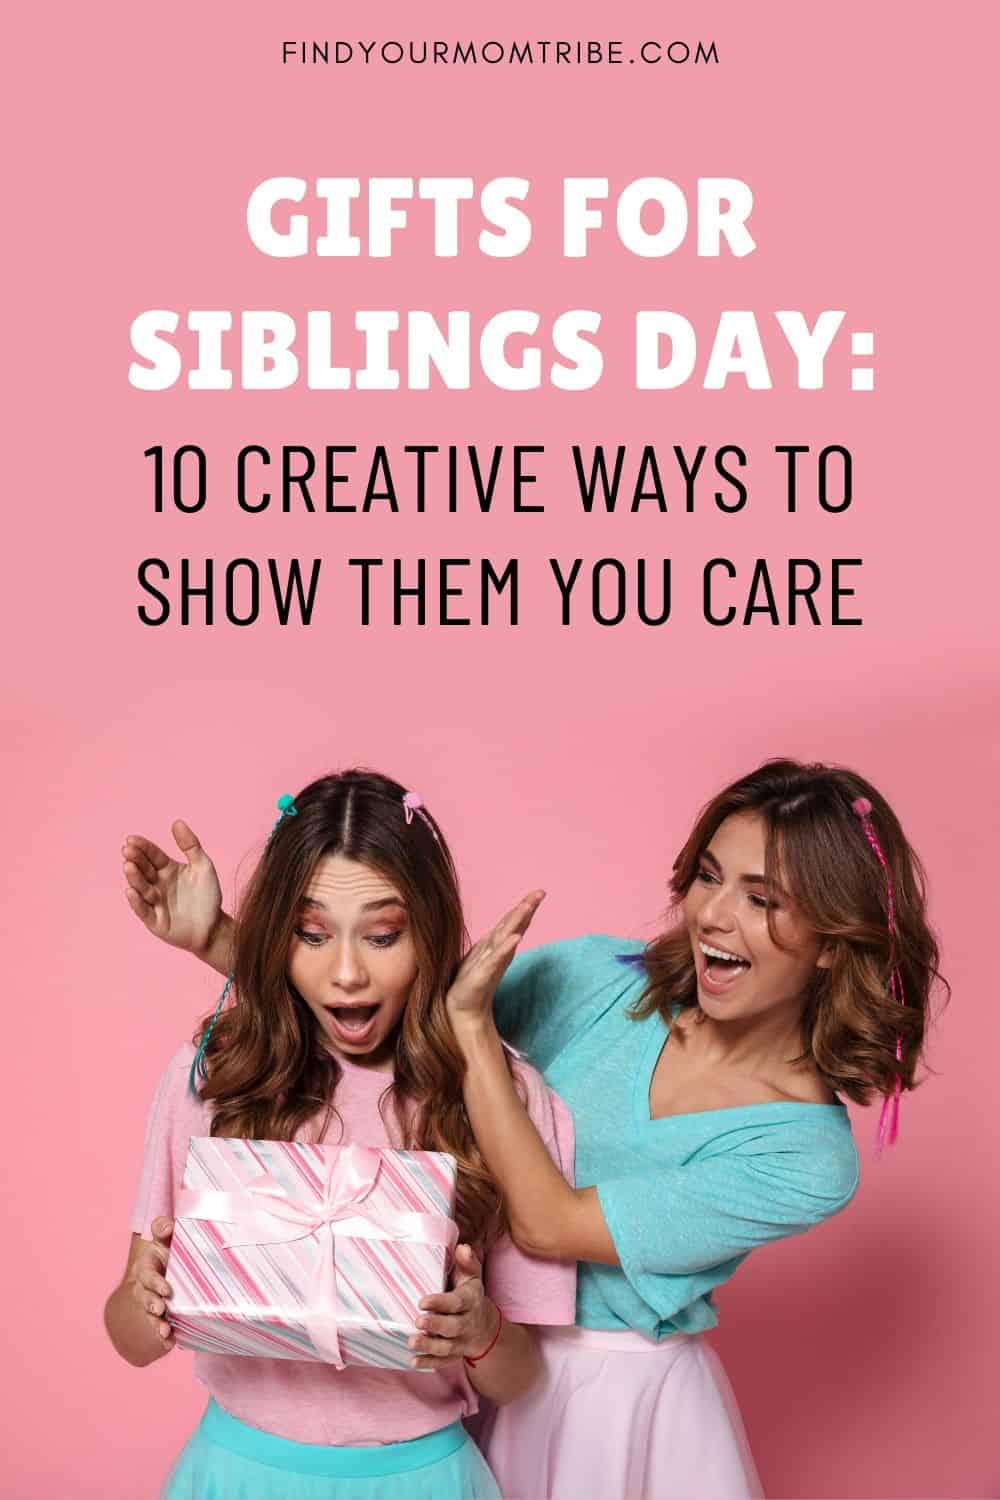 Gifts For Siblings Day Pinterest